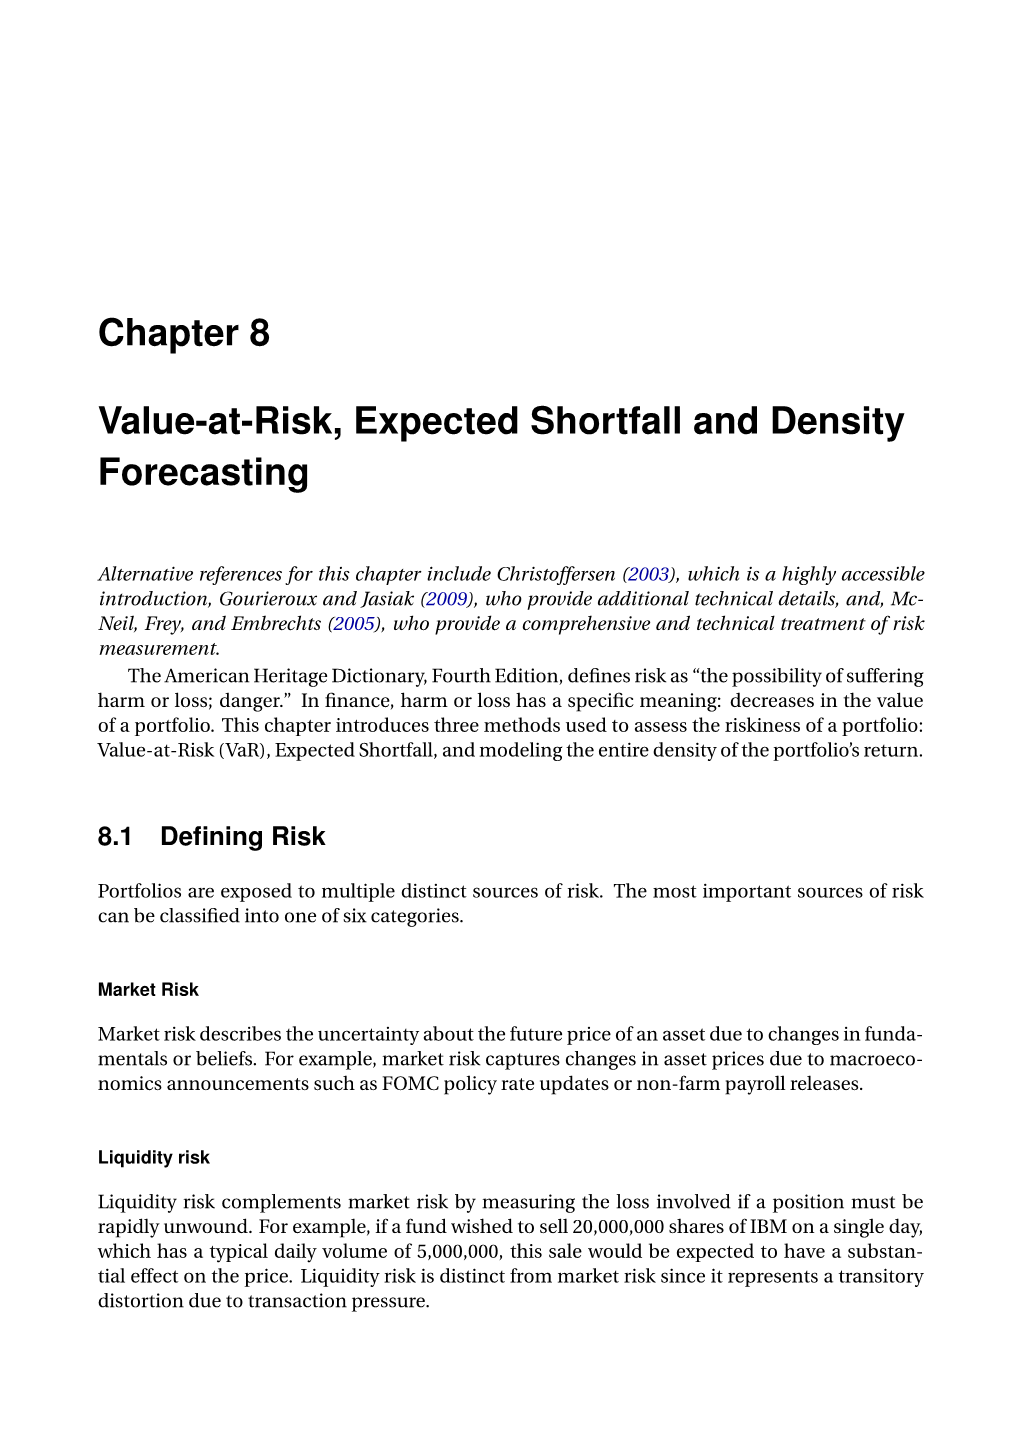 Chapter 8 Value-At-Risk, Expected Shortfall and Density Forecasting